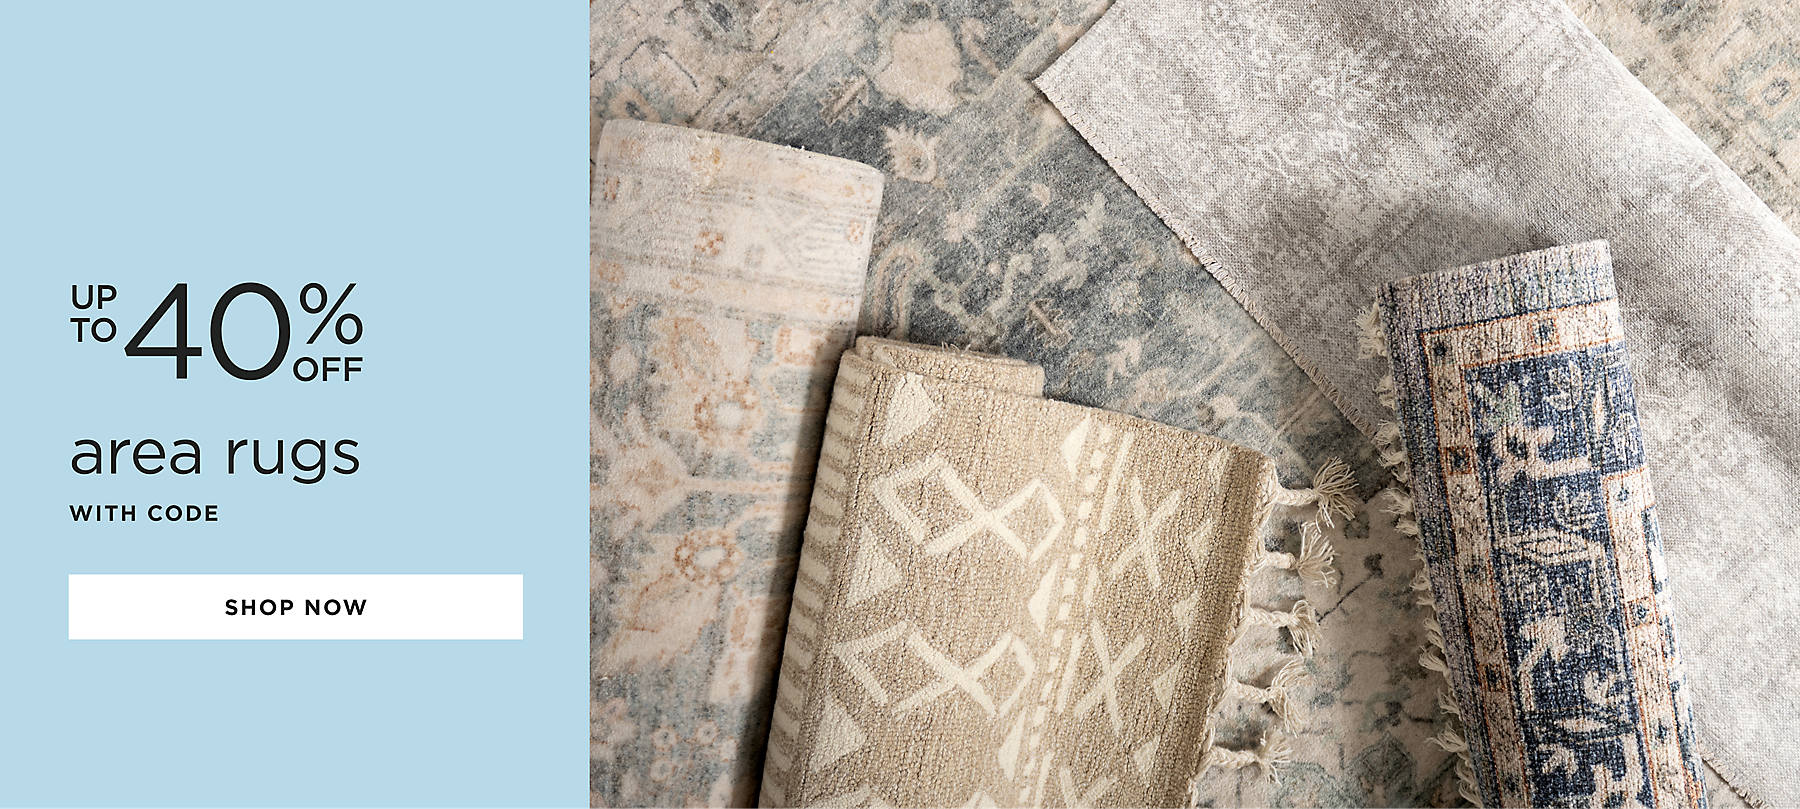 area rugs up to 40% off with code shop now